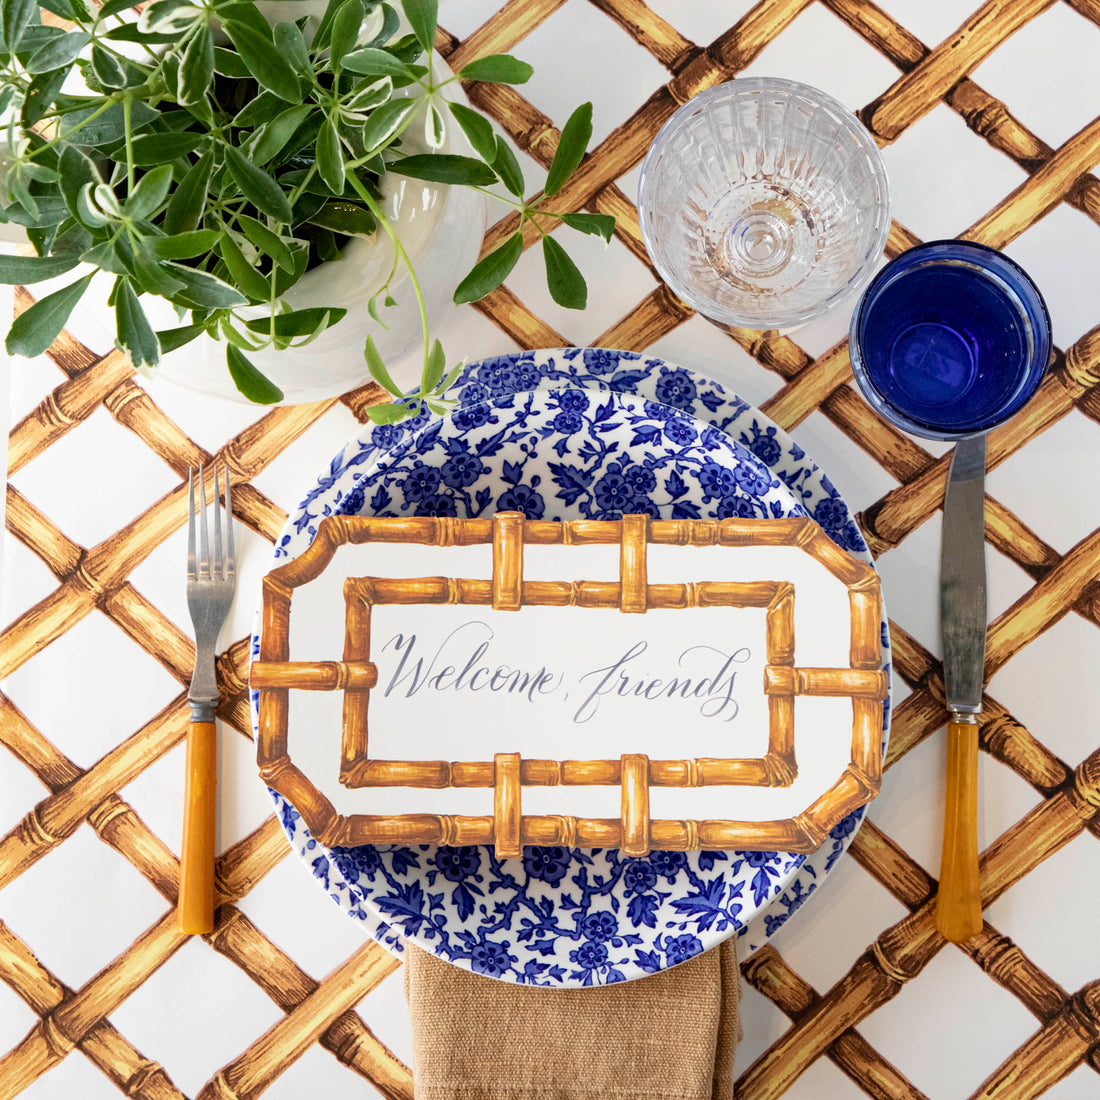 A Burleigh Blue Arden dinnerware plate on a wicker placemat with a folded napkin and a fork to the side, also noted as dishwasher safe.